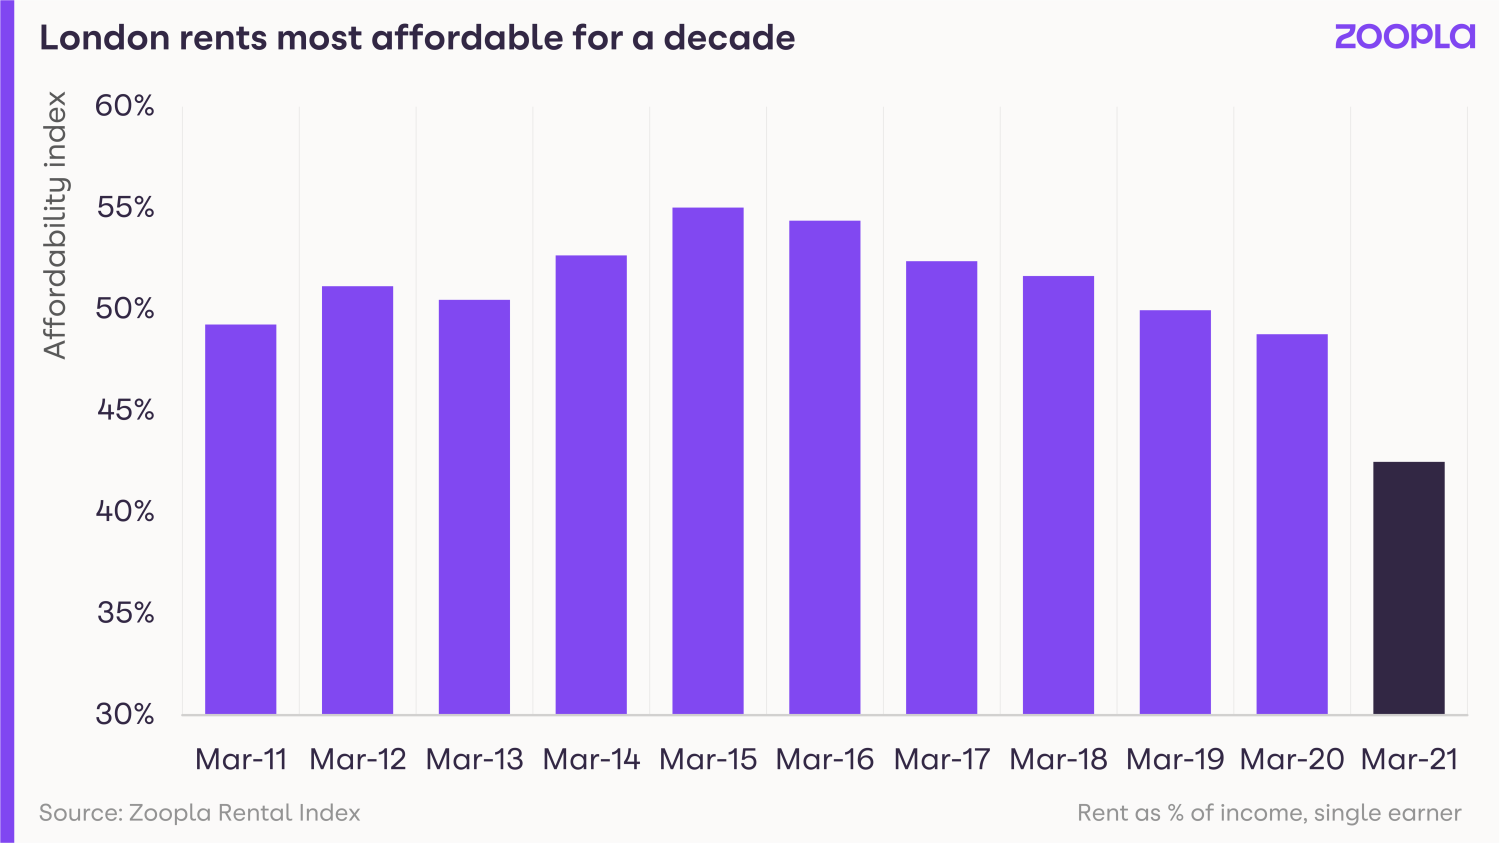 Graphic shows London rents most affordable for a decade